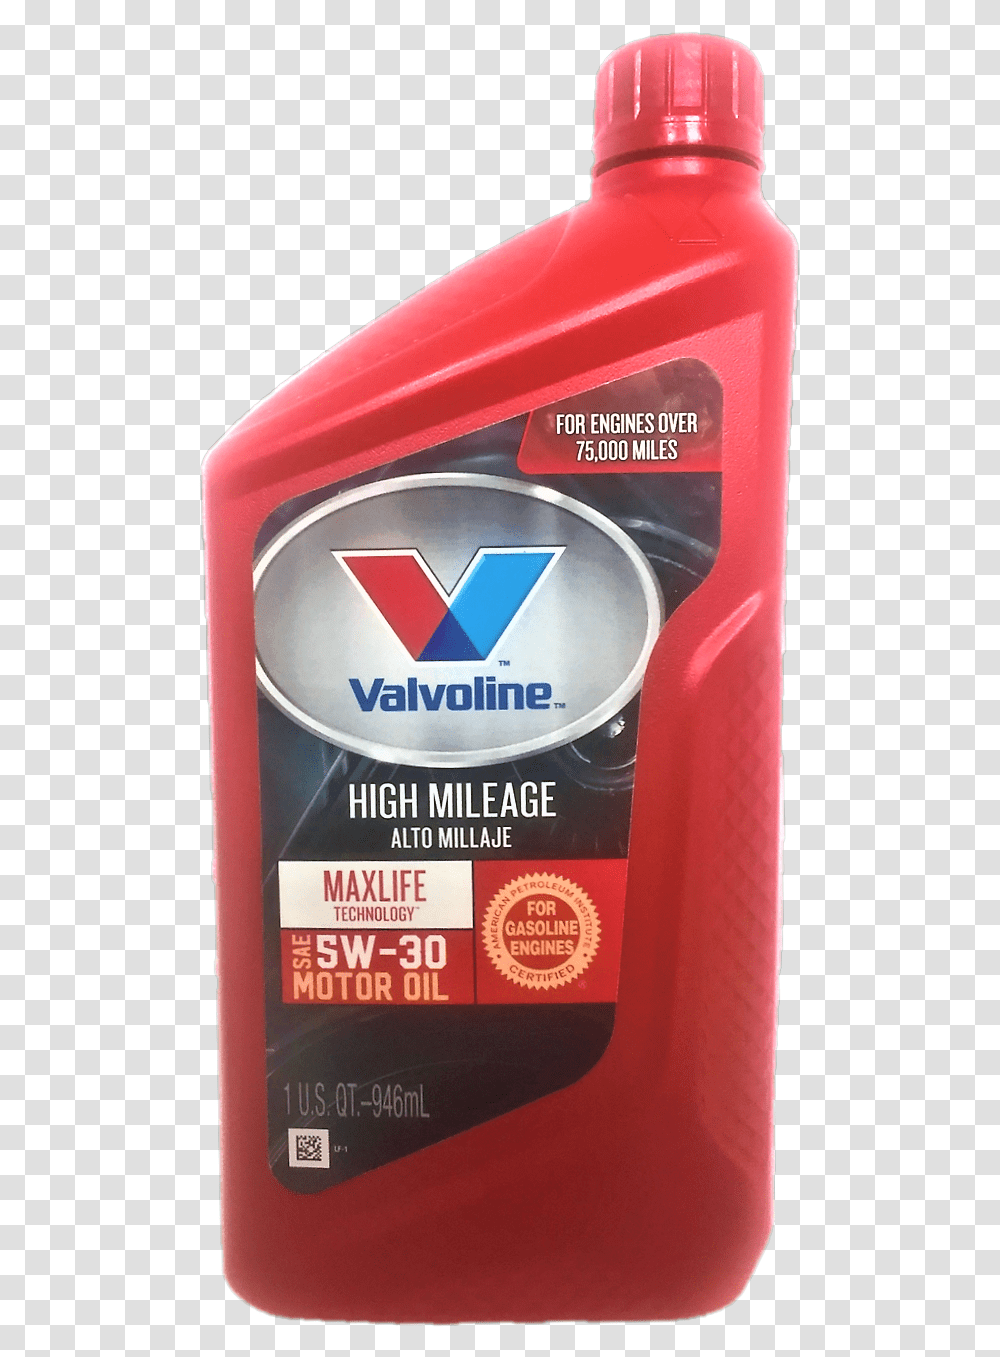 Valvoline Synpower Full Synthetic Motor Oil Vv927 Valvoline, Label, Cosmetics, Fire Hydrant Transparent Png